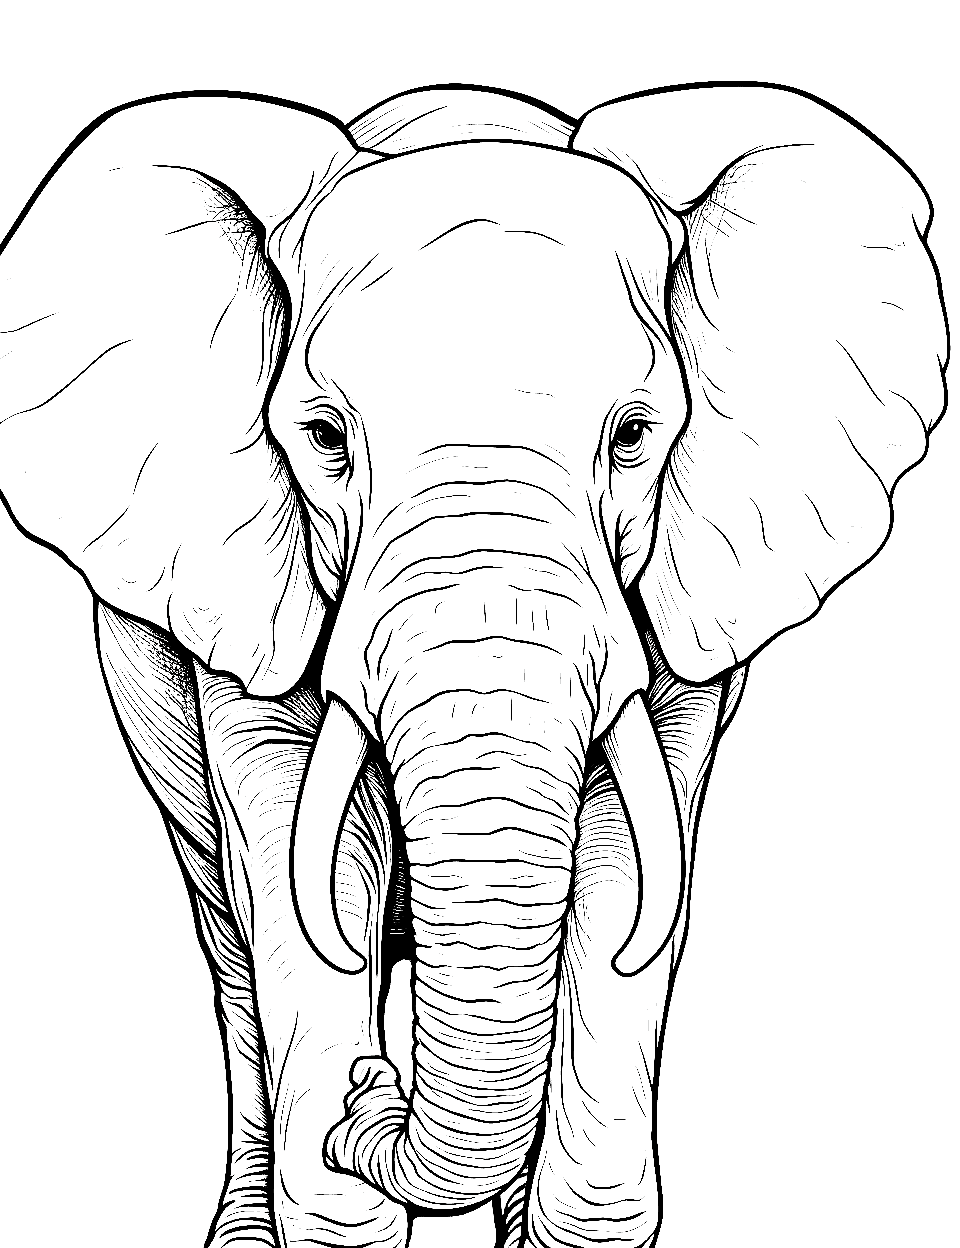 Elephant Head Close-up Coloring Page - A zoomed-in view of an elephant’s head with expressive eyes.